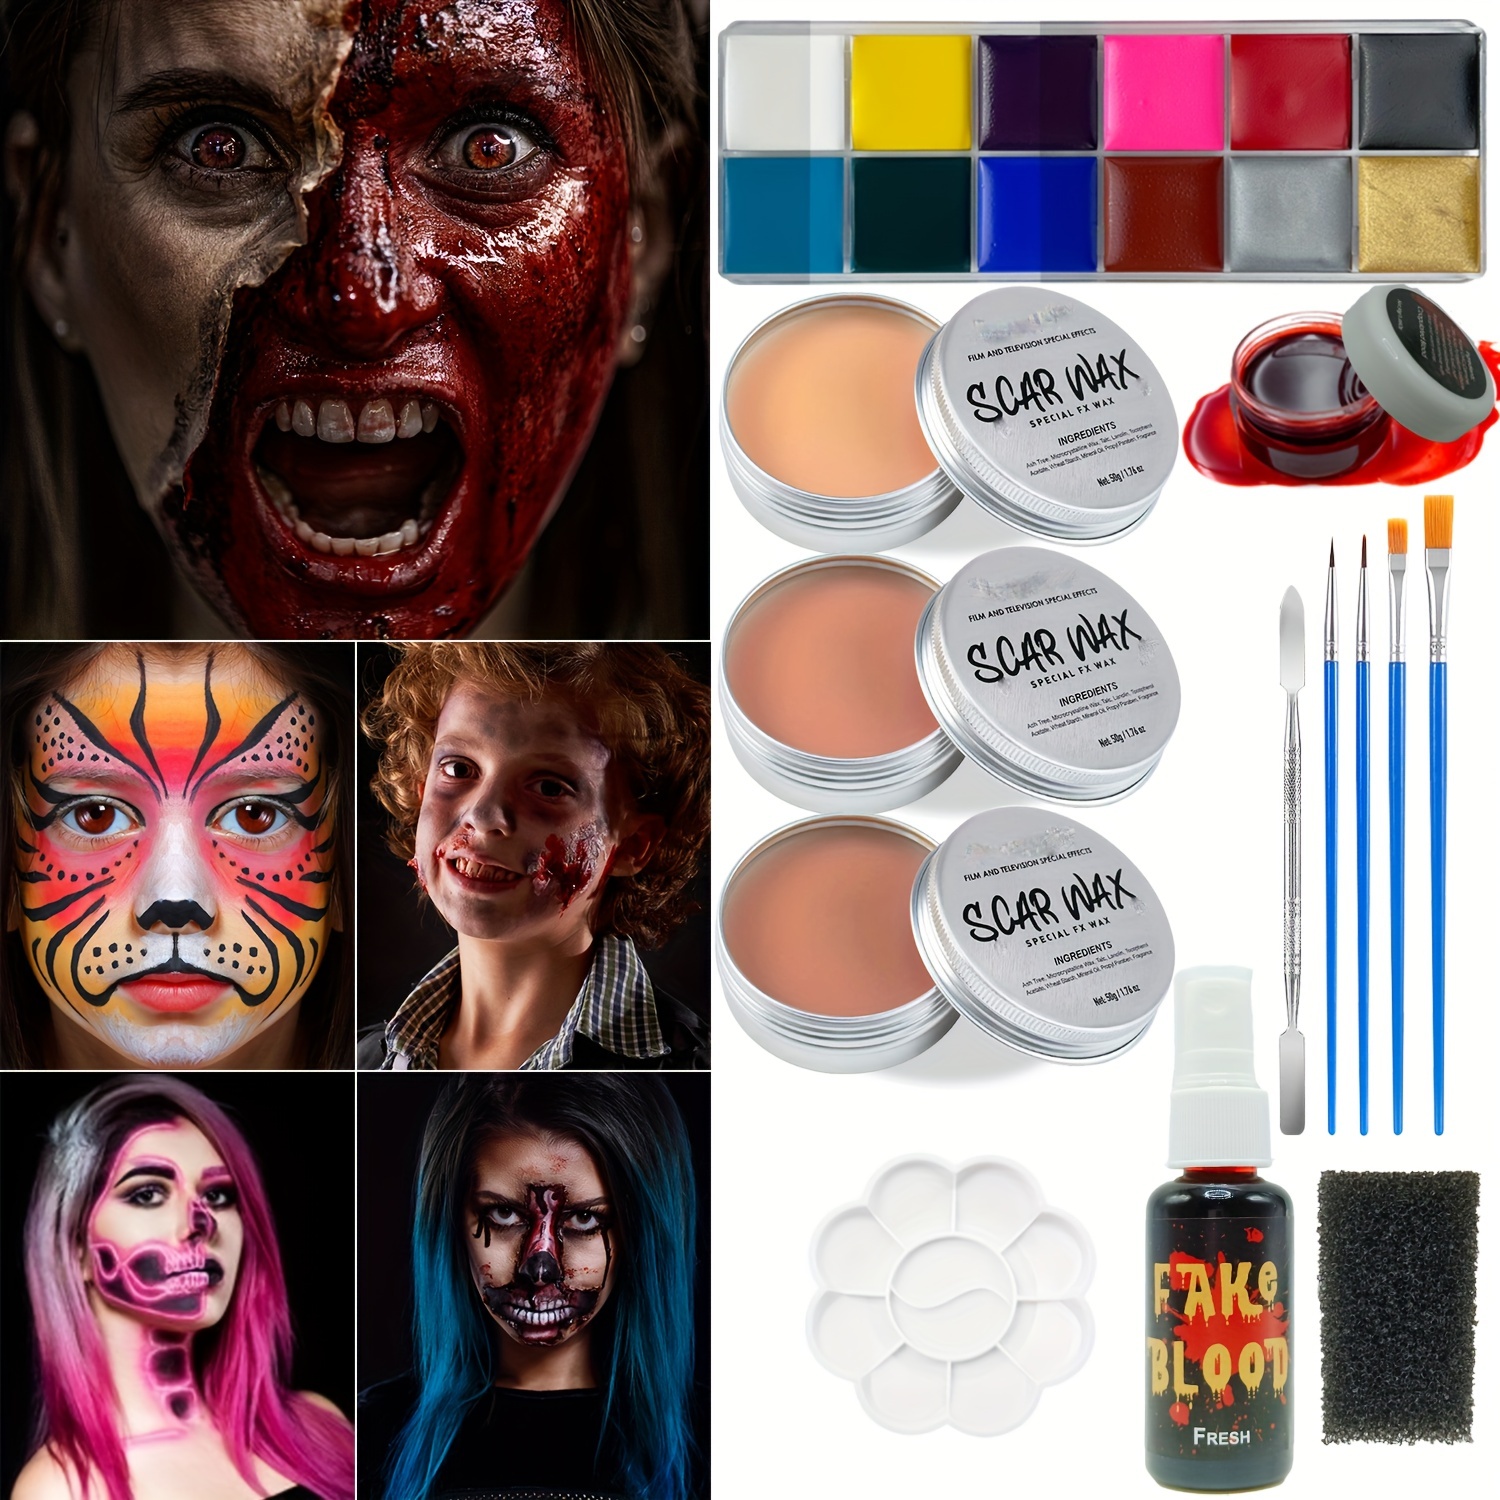 Afflano Fake Blood Halloween Makeup Kit 6 Pcs,Coagulated Blood Gel+Stipple  Sponge+Blood Spray/Splatter for Clothes,Special Effects,Zombie,Vampire  Monster SFX Makeup,Theater,Stage,Film,Costumes,Cosplay